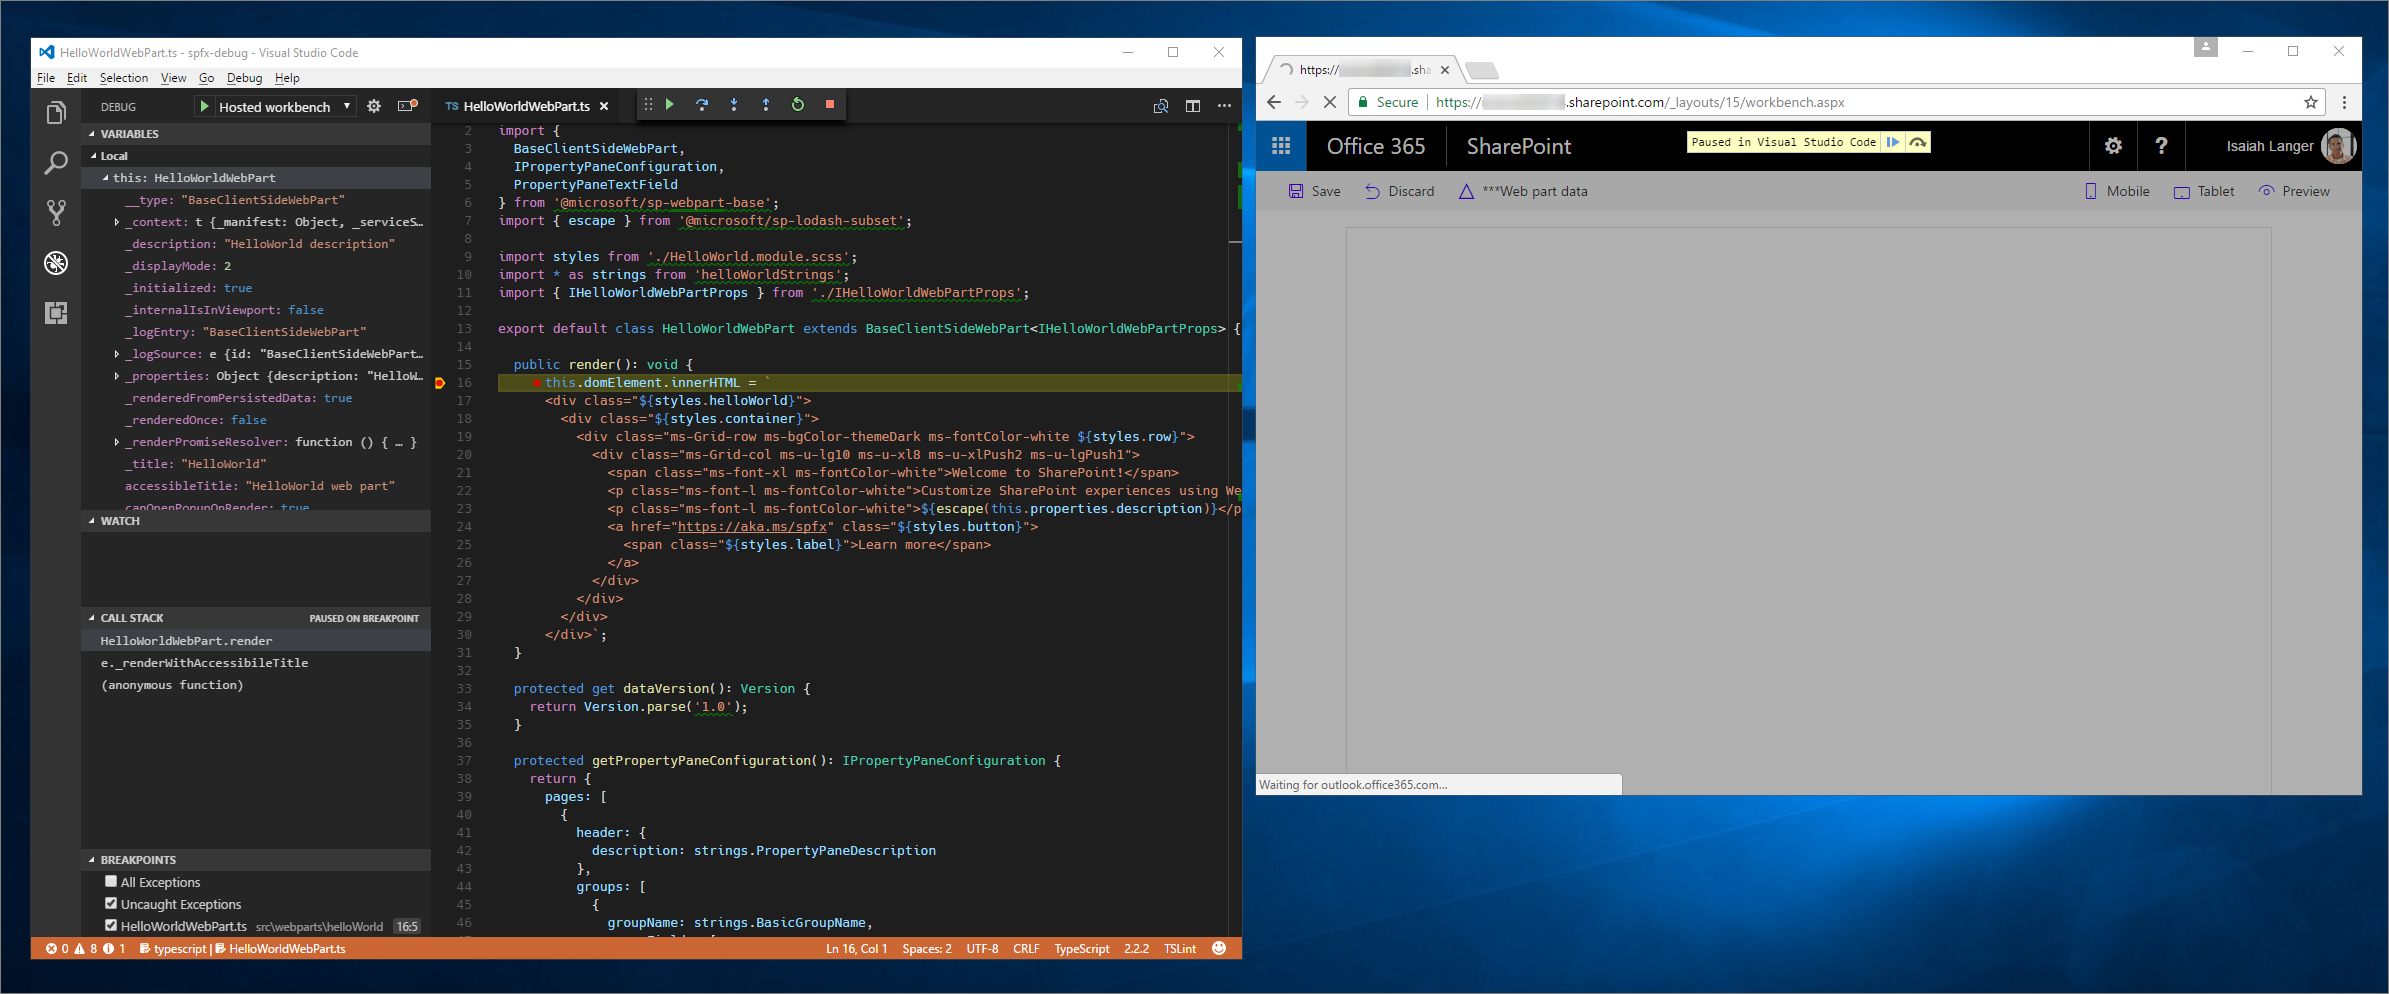 Breakpoint hit in Visual Studio Code when debugging a SharePoint Framework client-side web part in the hosted workbench